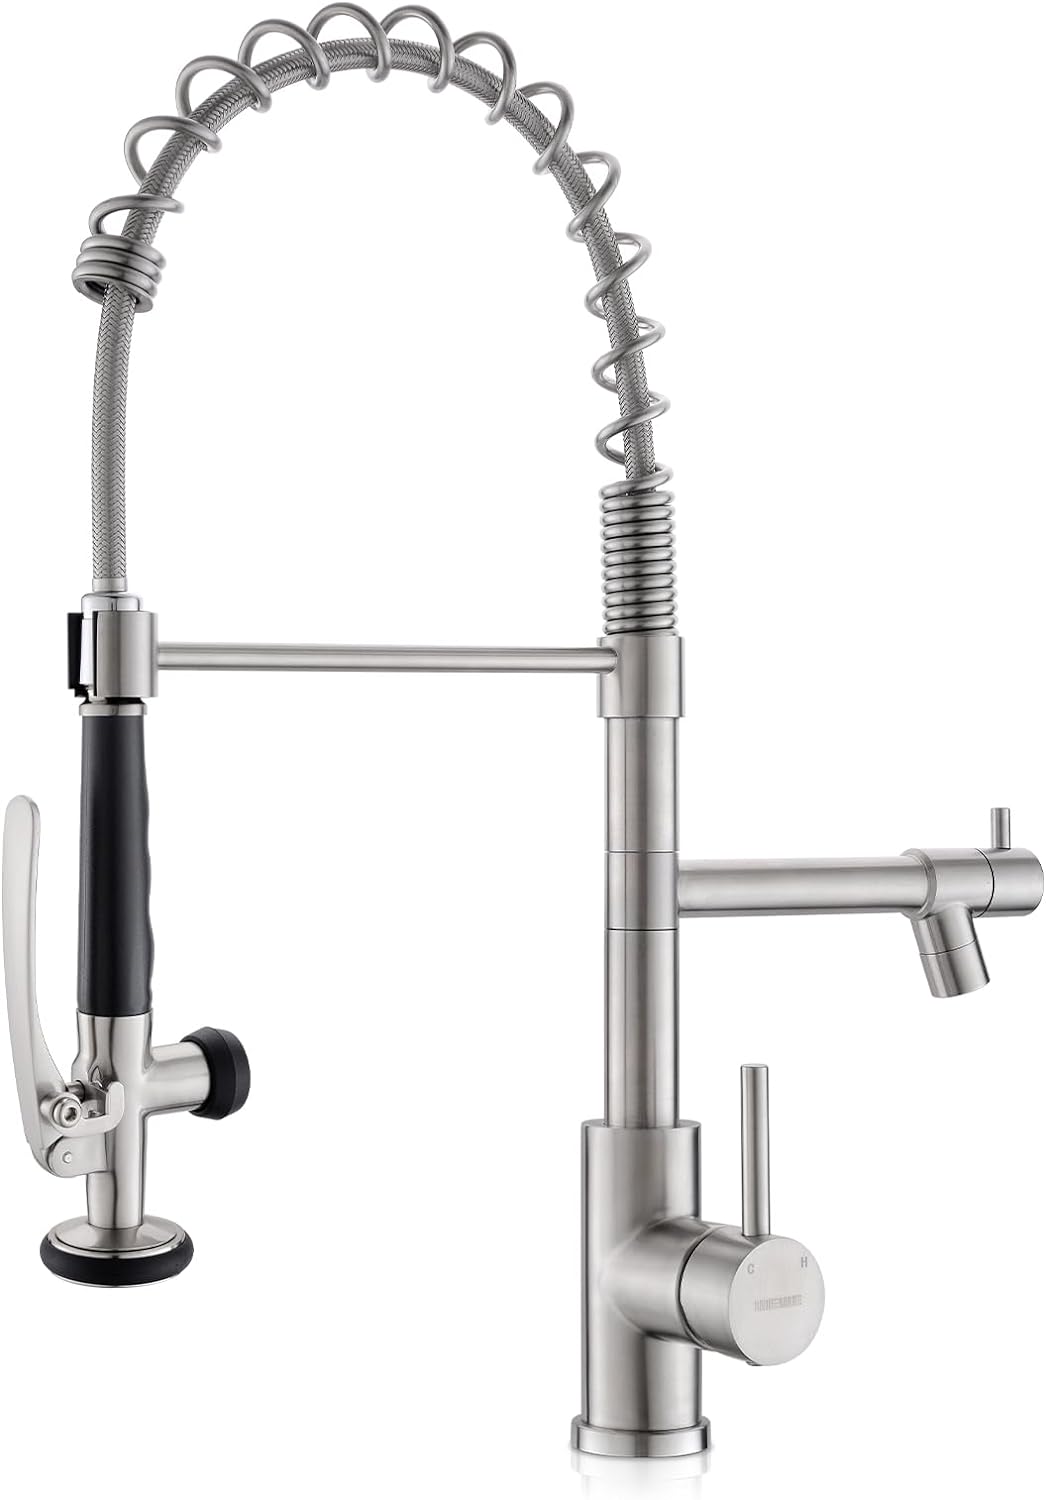 WEWE Kitchen Faucet with Pull Down Sprayer, Kitchen Sink Faucet with Pot Filler Single Handle Commercial High Arc Stainless Steel Brushed Nickel for Bar Laundry RV Utility Sink